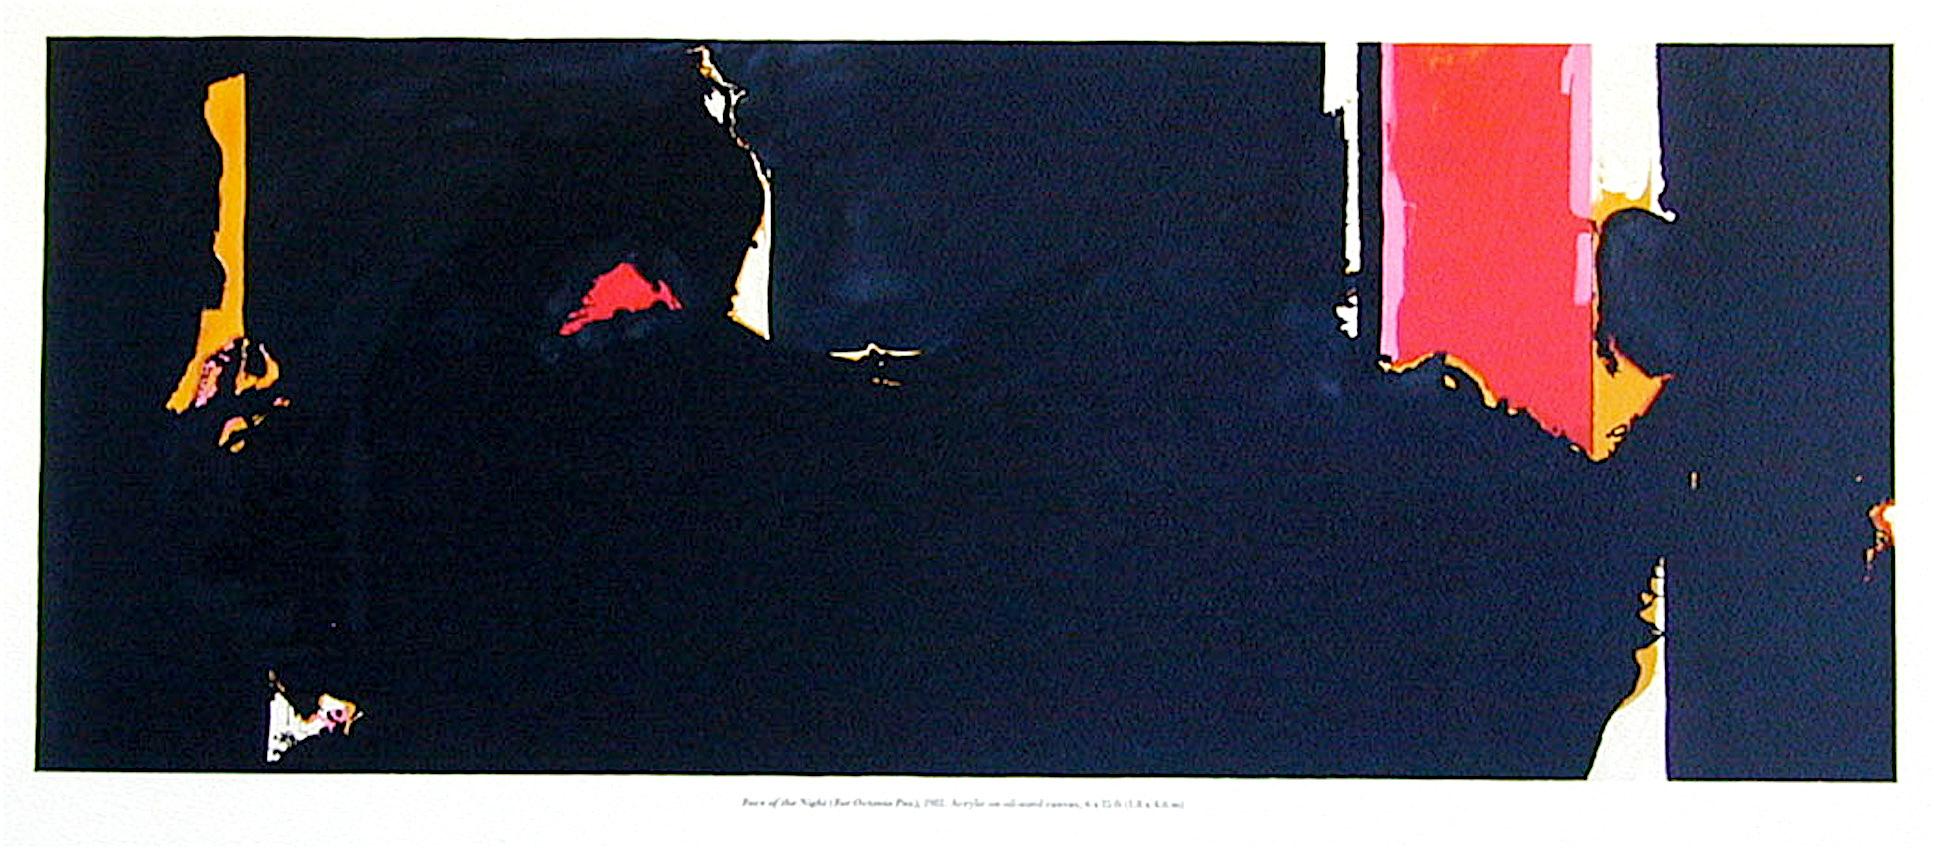 FACE OF THE NIGHT(Octavio Paz) Hand Lithography Poster, Abstract Expressionist - Print by (after) Robert Motherwell